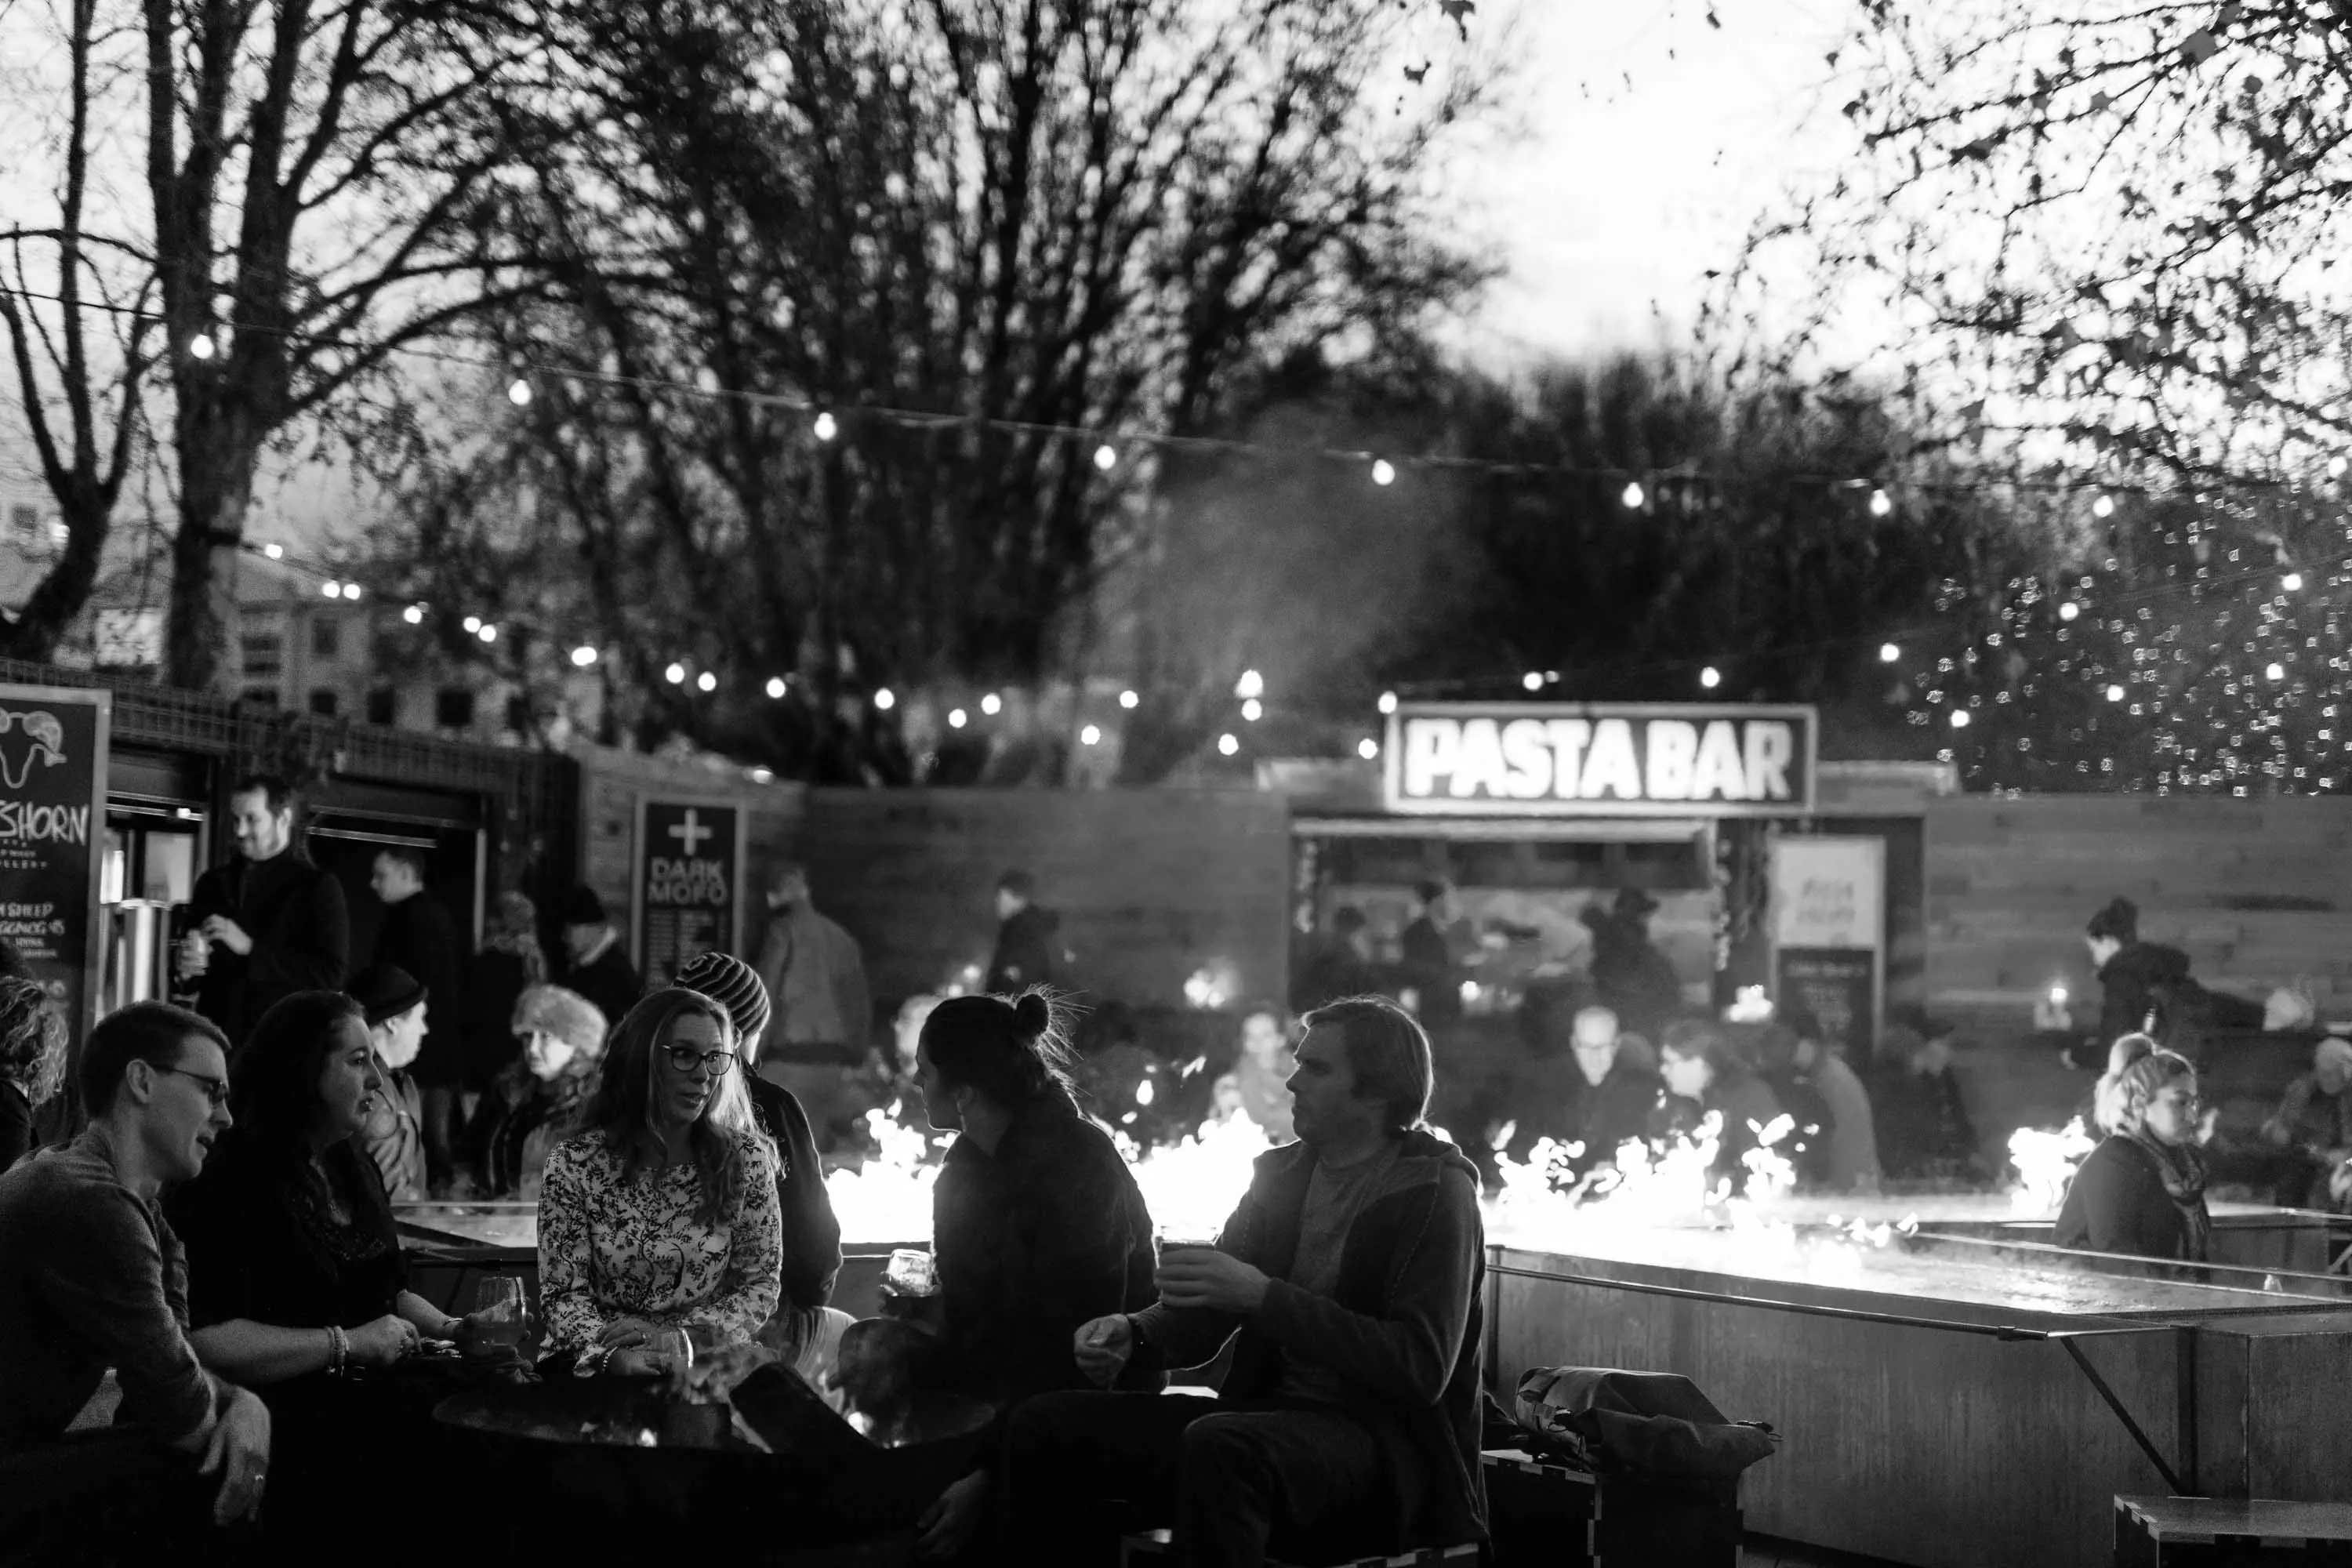 People sit outside below tree and next to large fire pits, eating, talking and drinking.